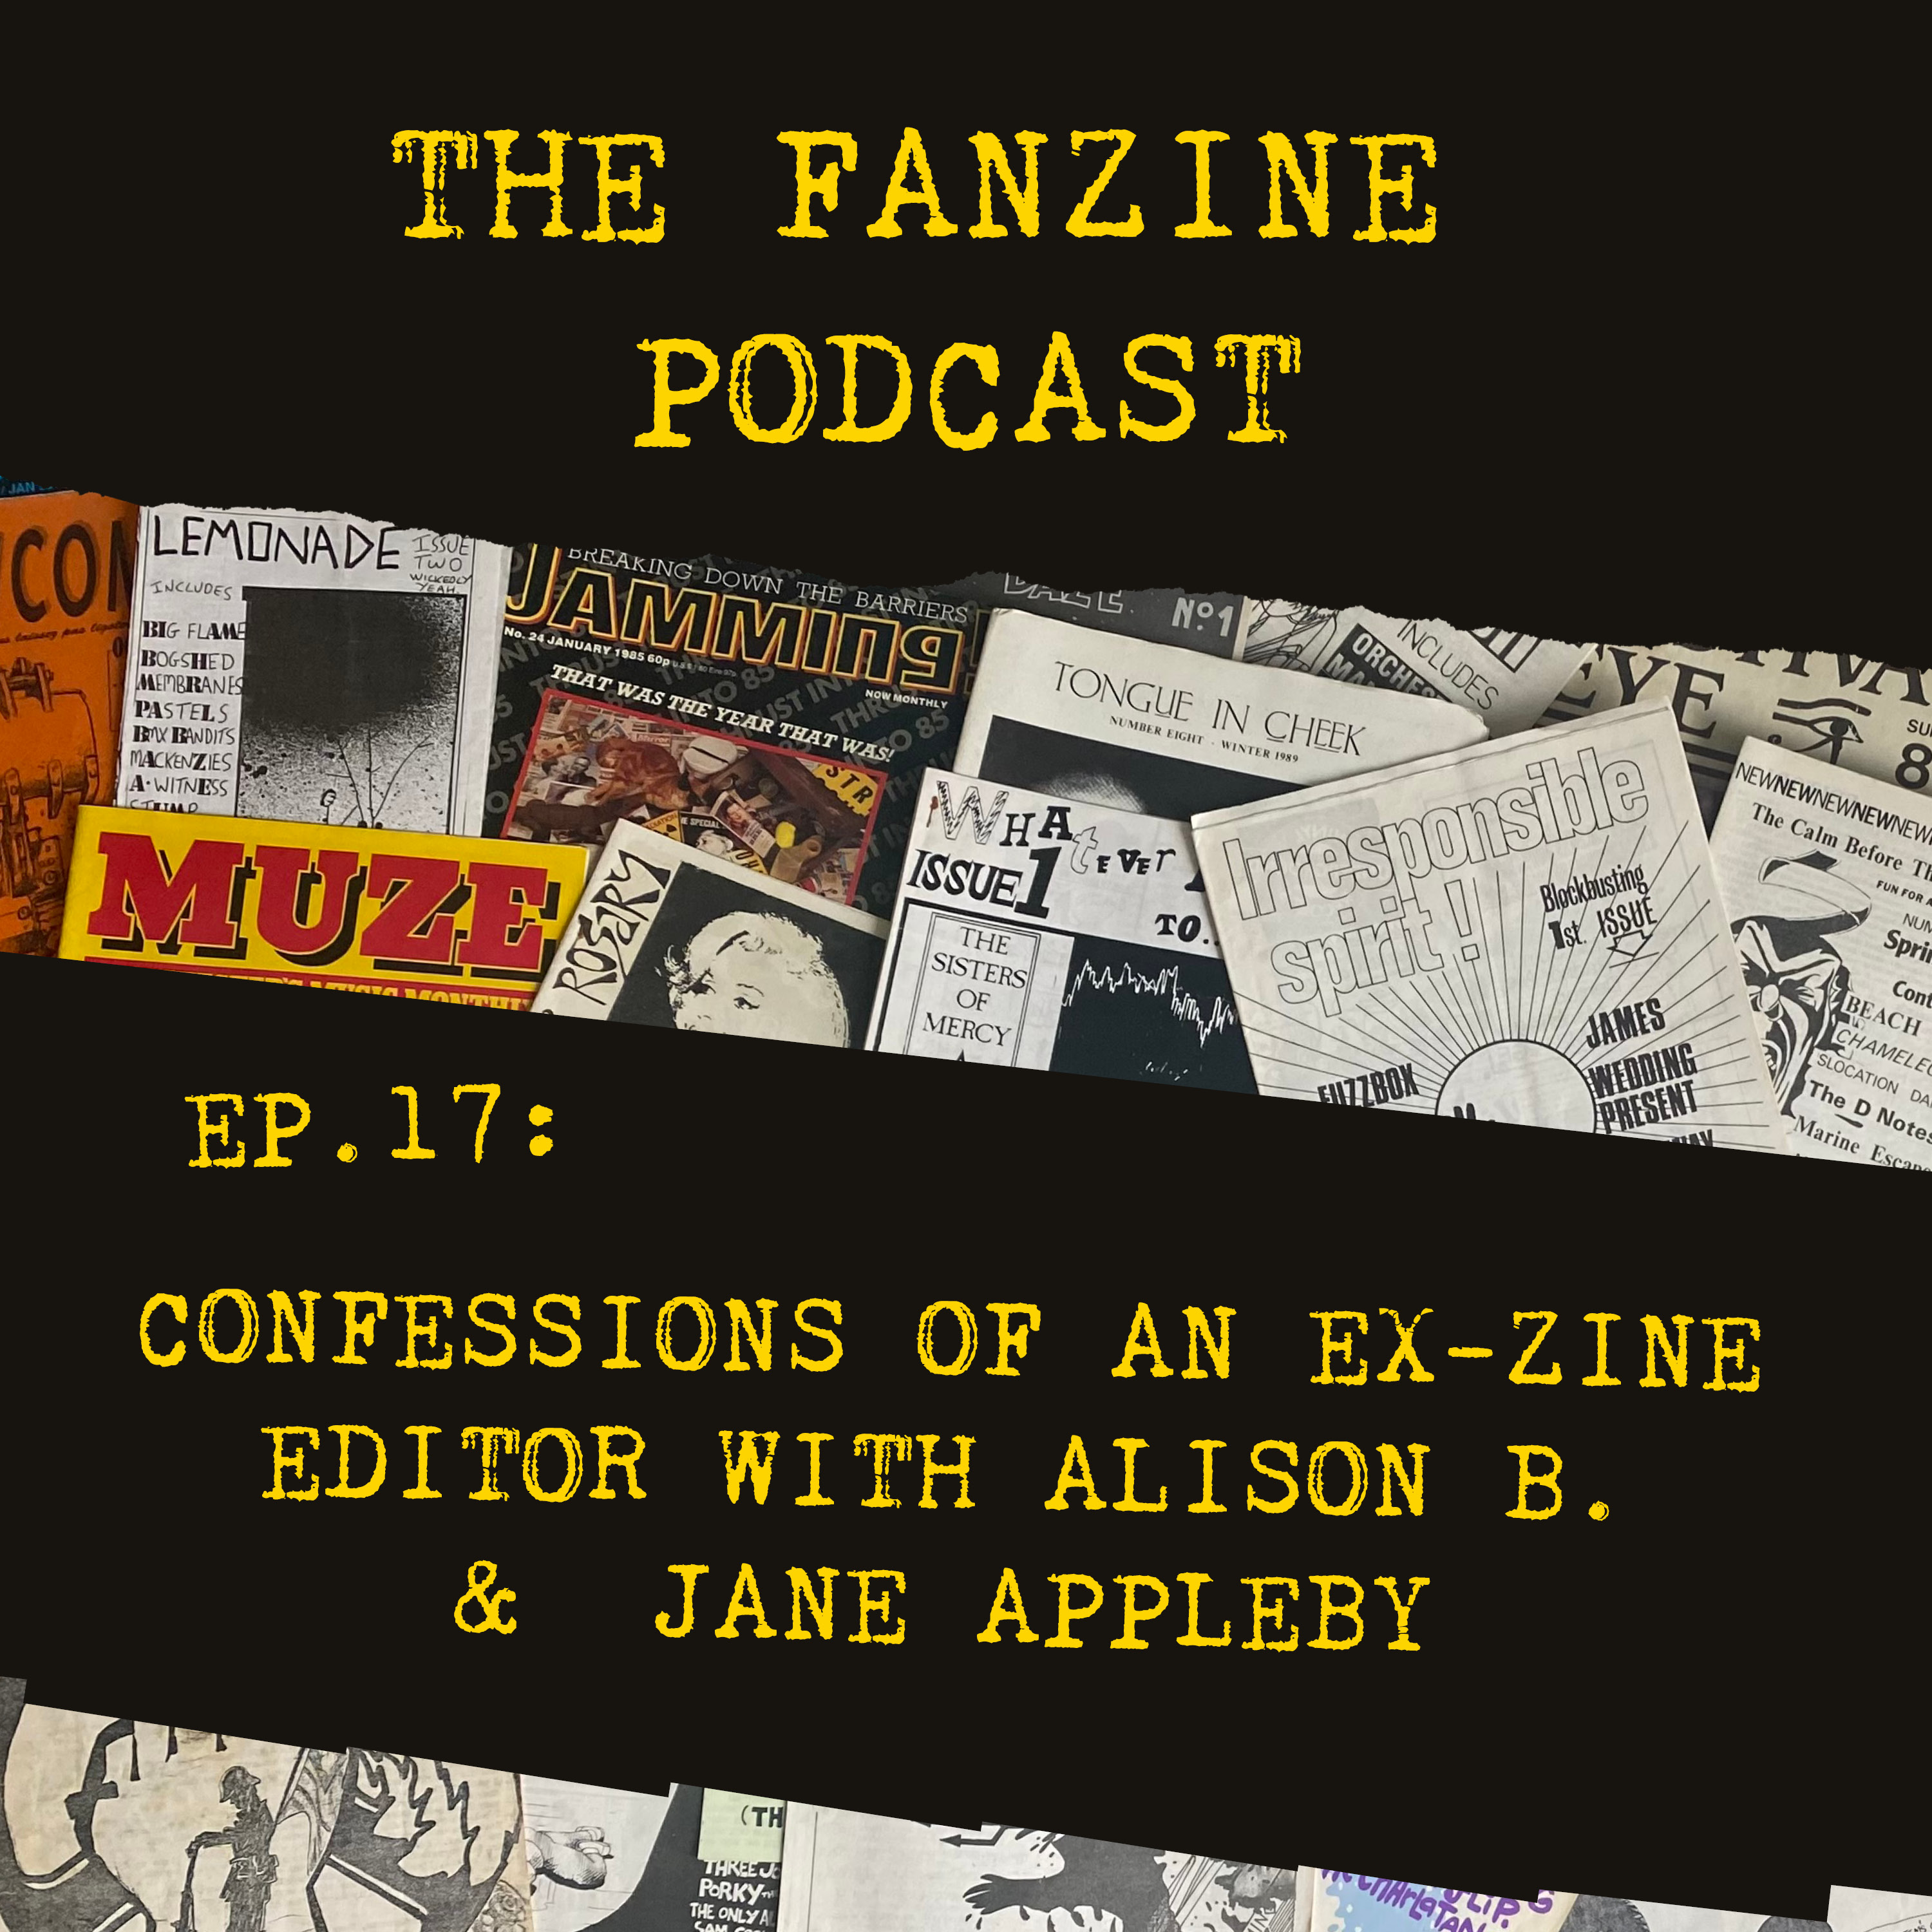 Ep. 17: Confessions of an Ex-Zine Editor